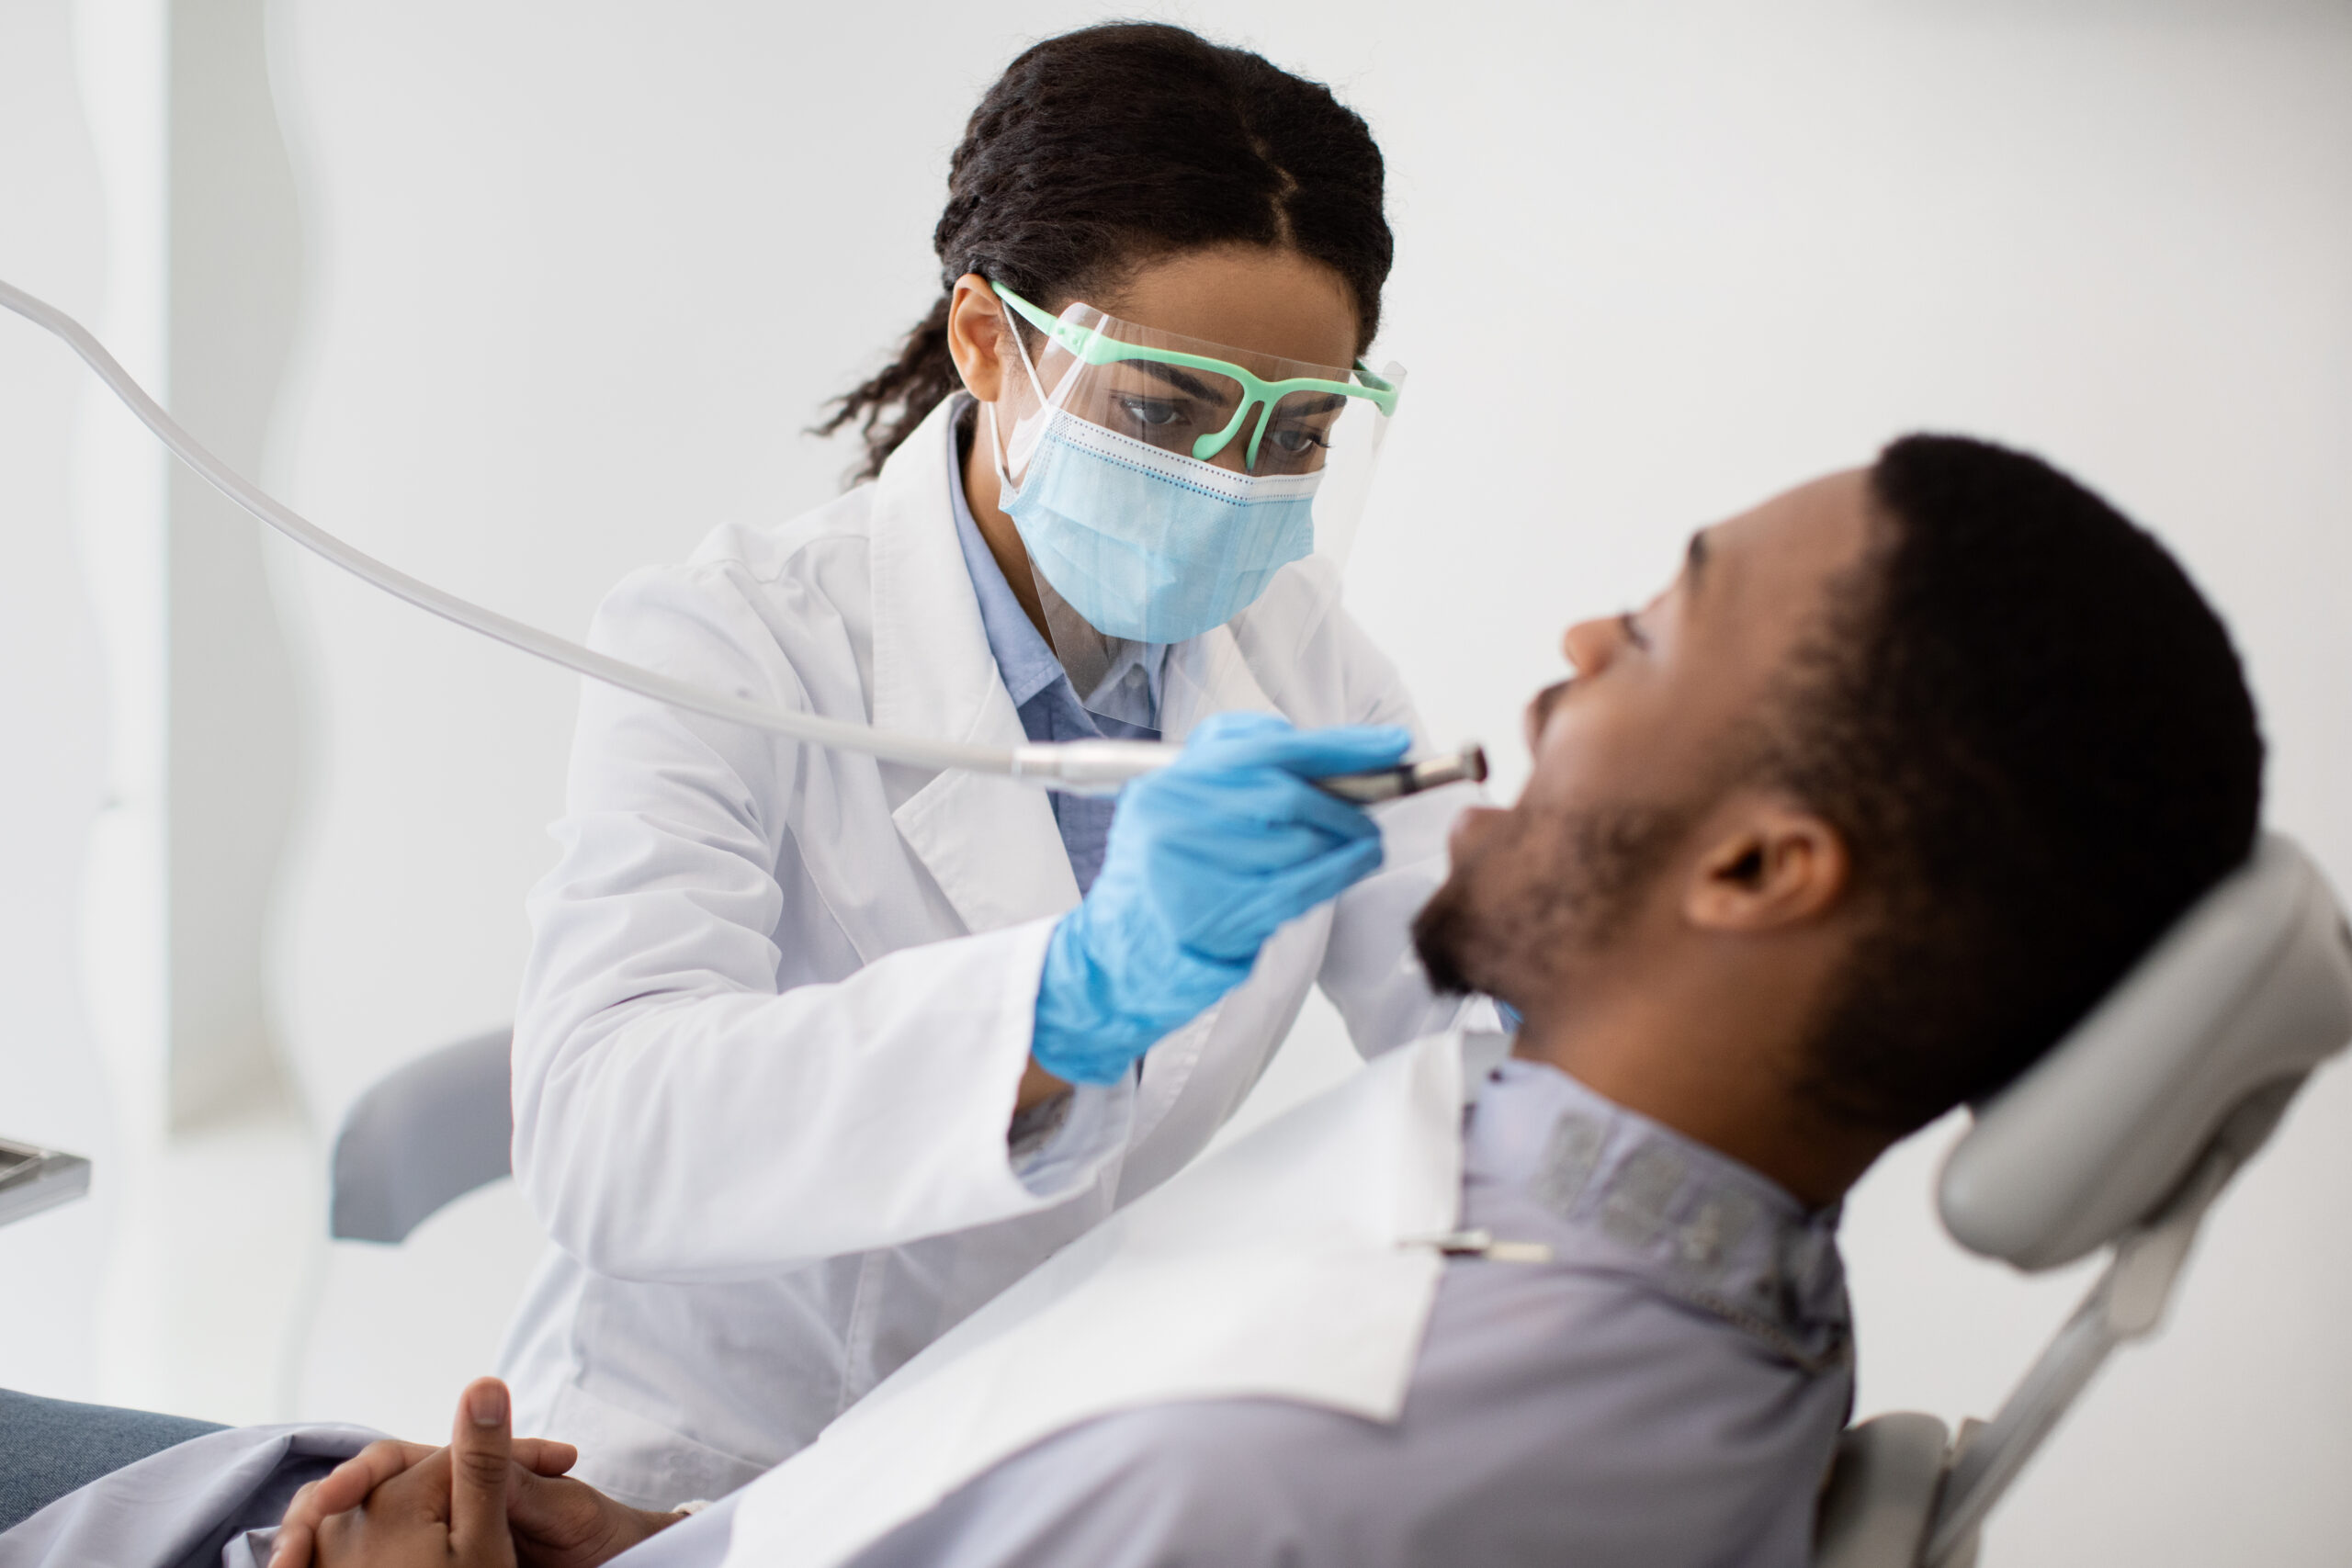 Dentists have a duty to treat patients with HIV